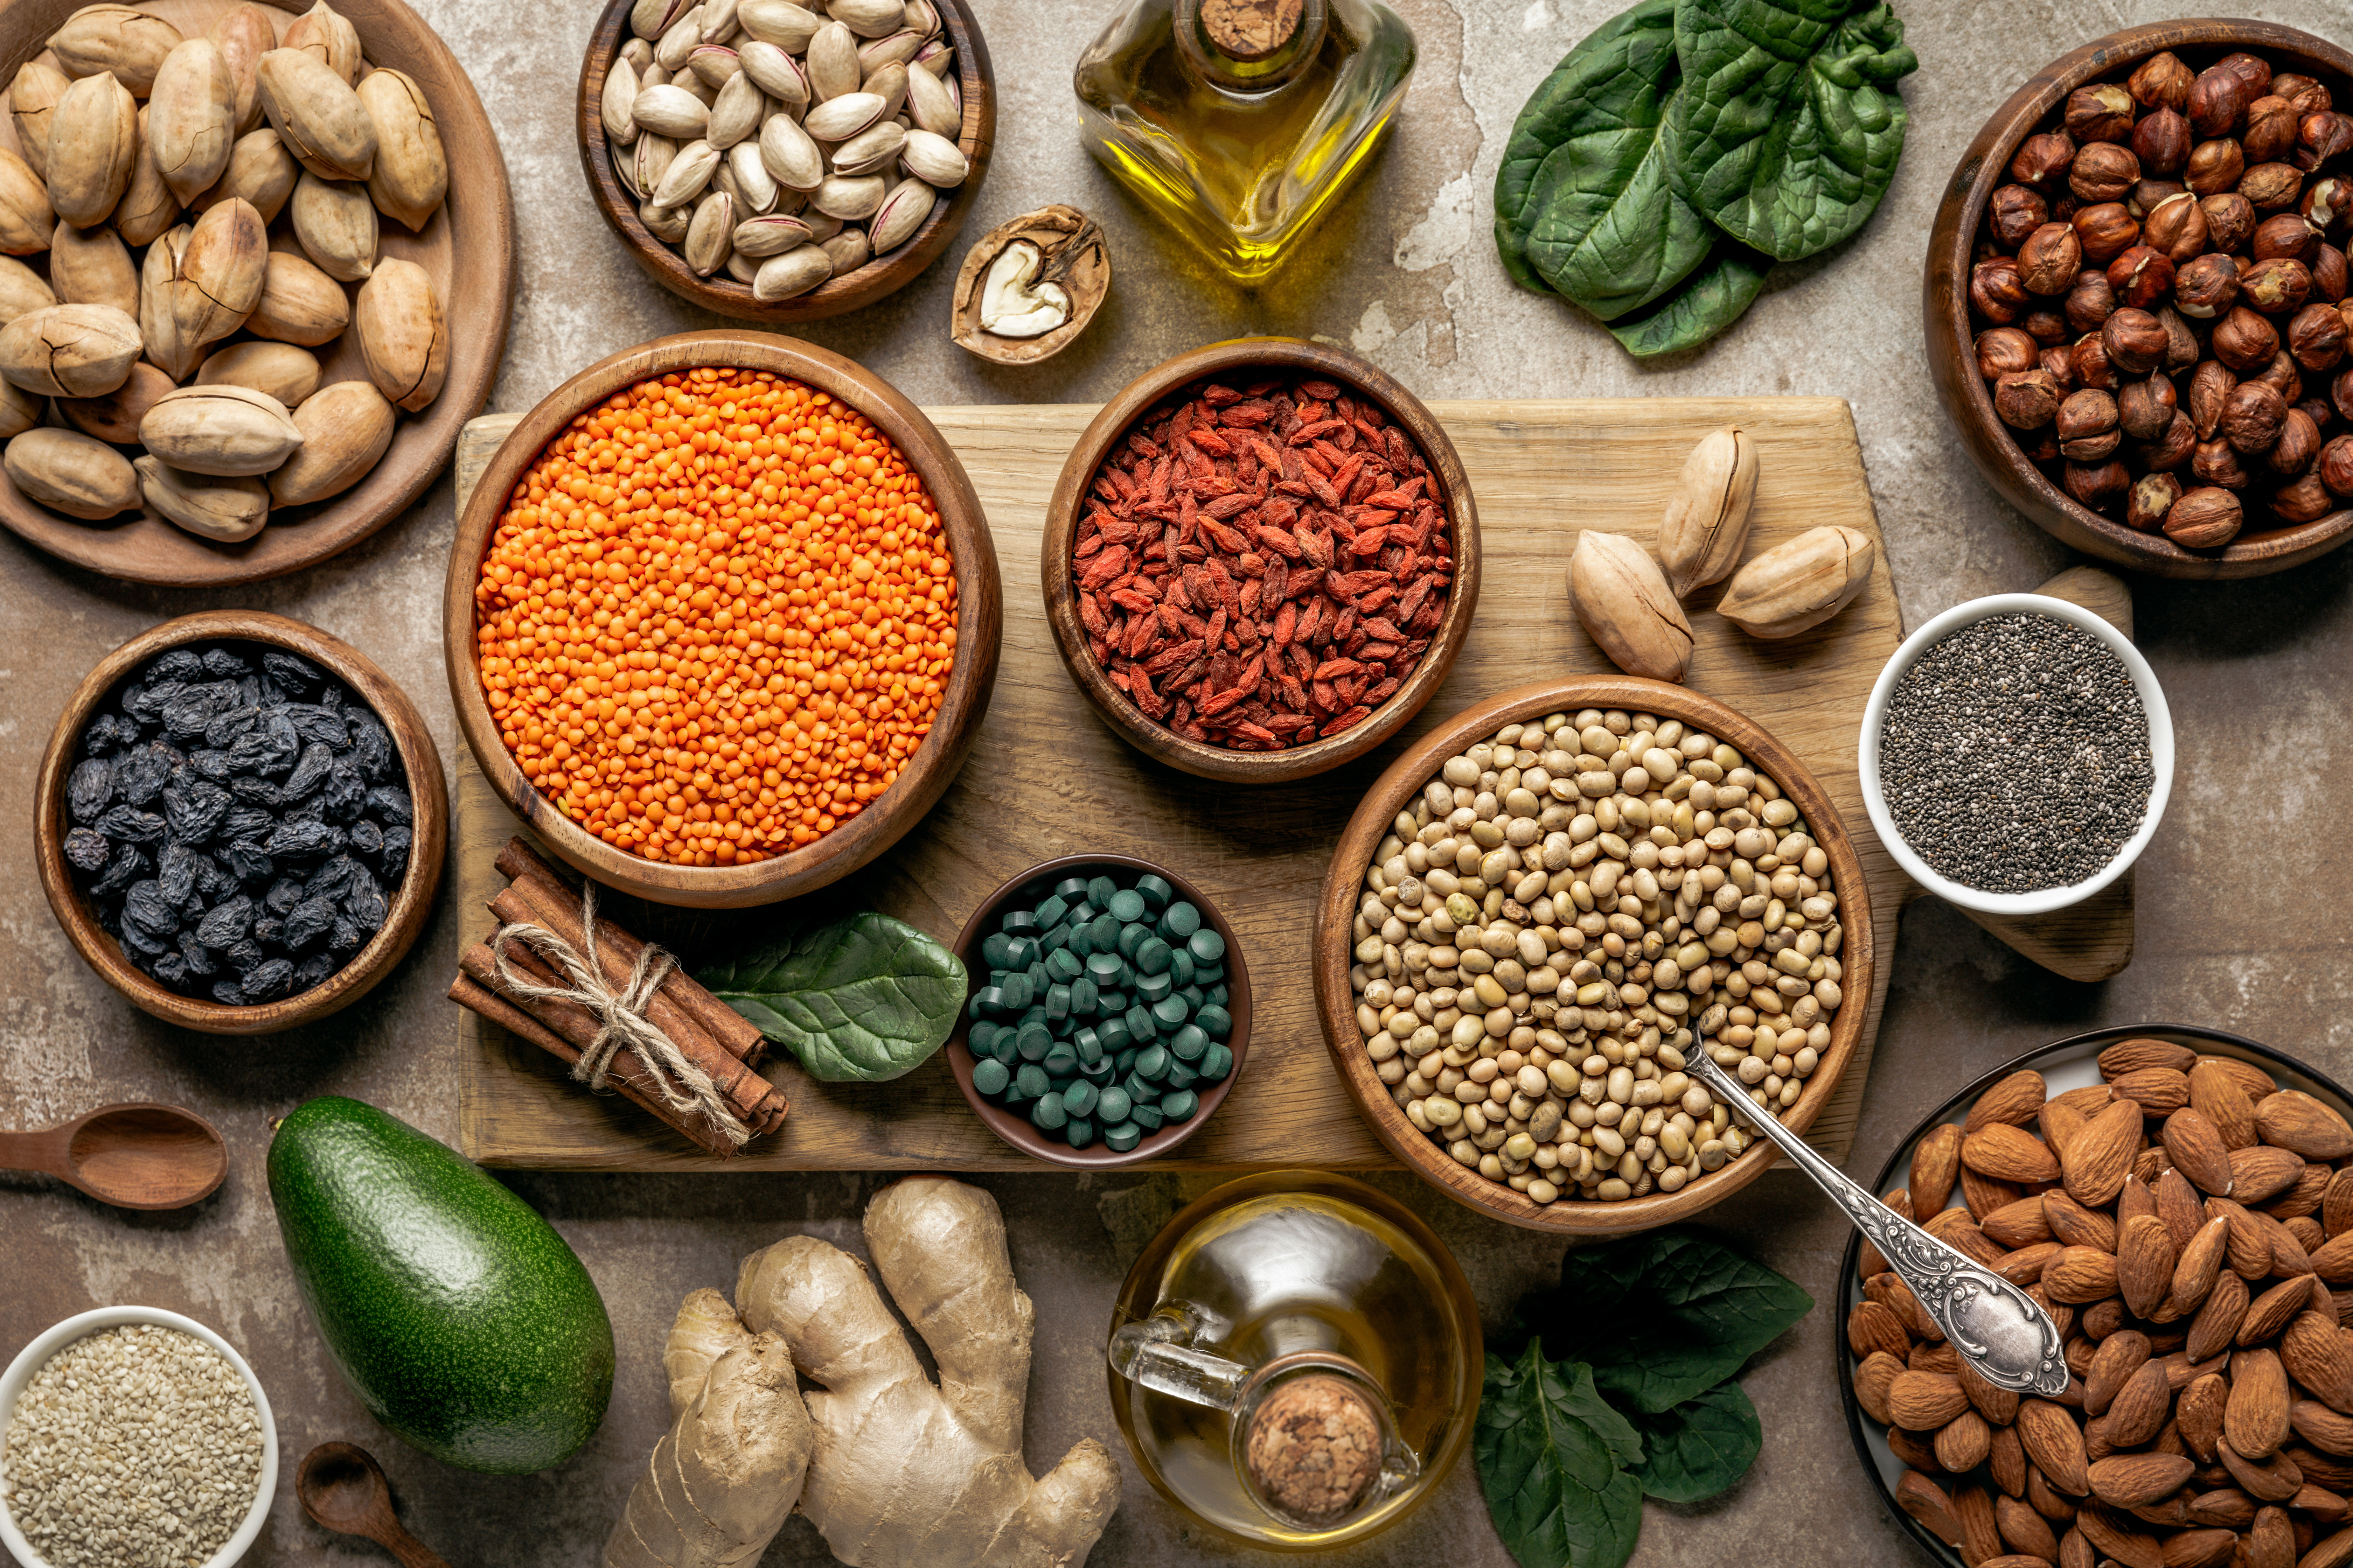 flat lay of legumes, superfoods and healthy ingredients on wooden board with rustic background, Sunn mat COLOURBOX36334954.jpg